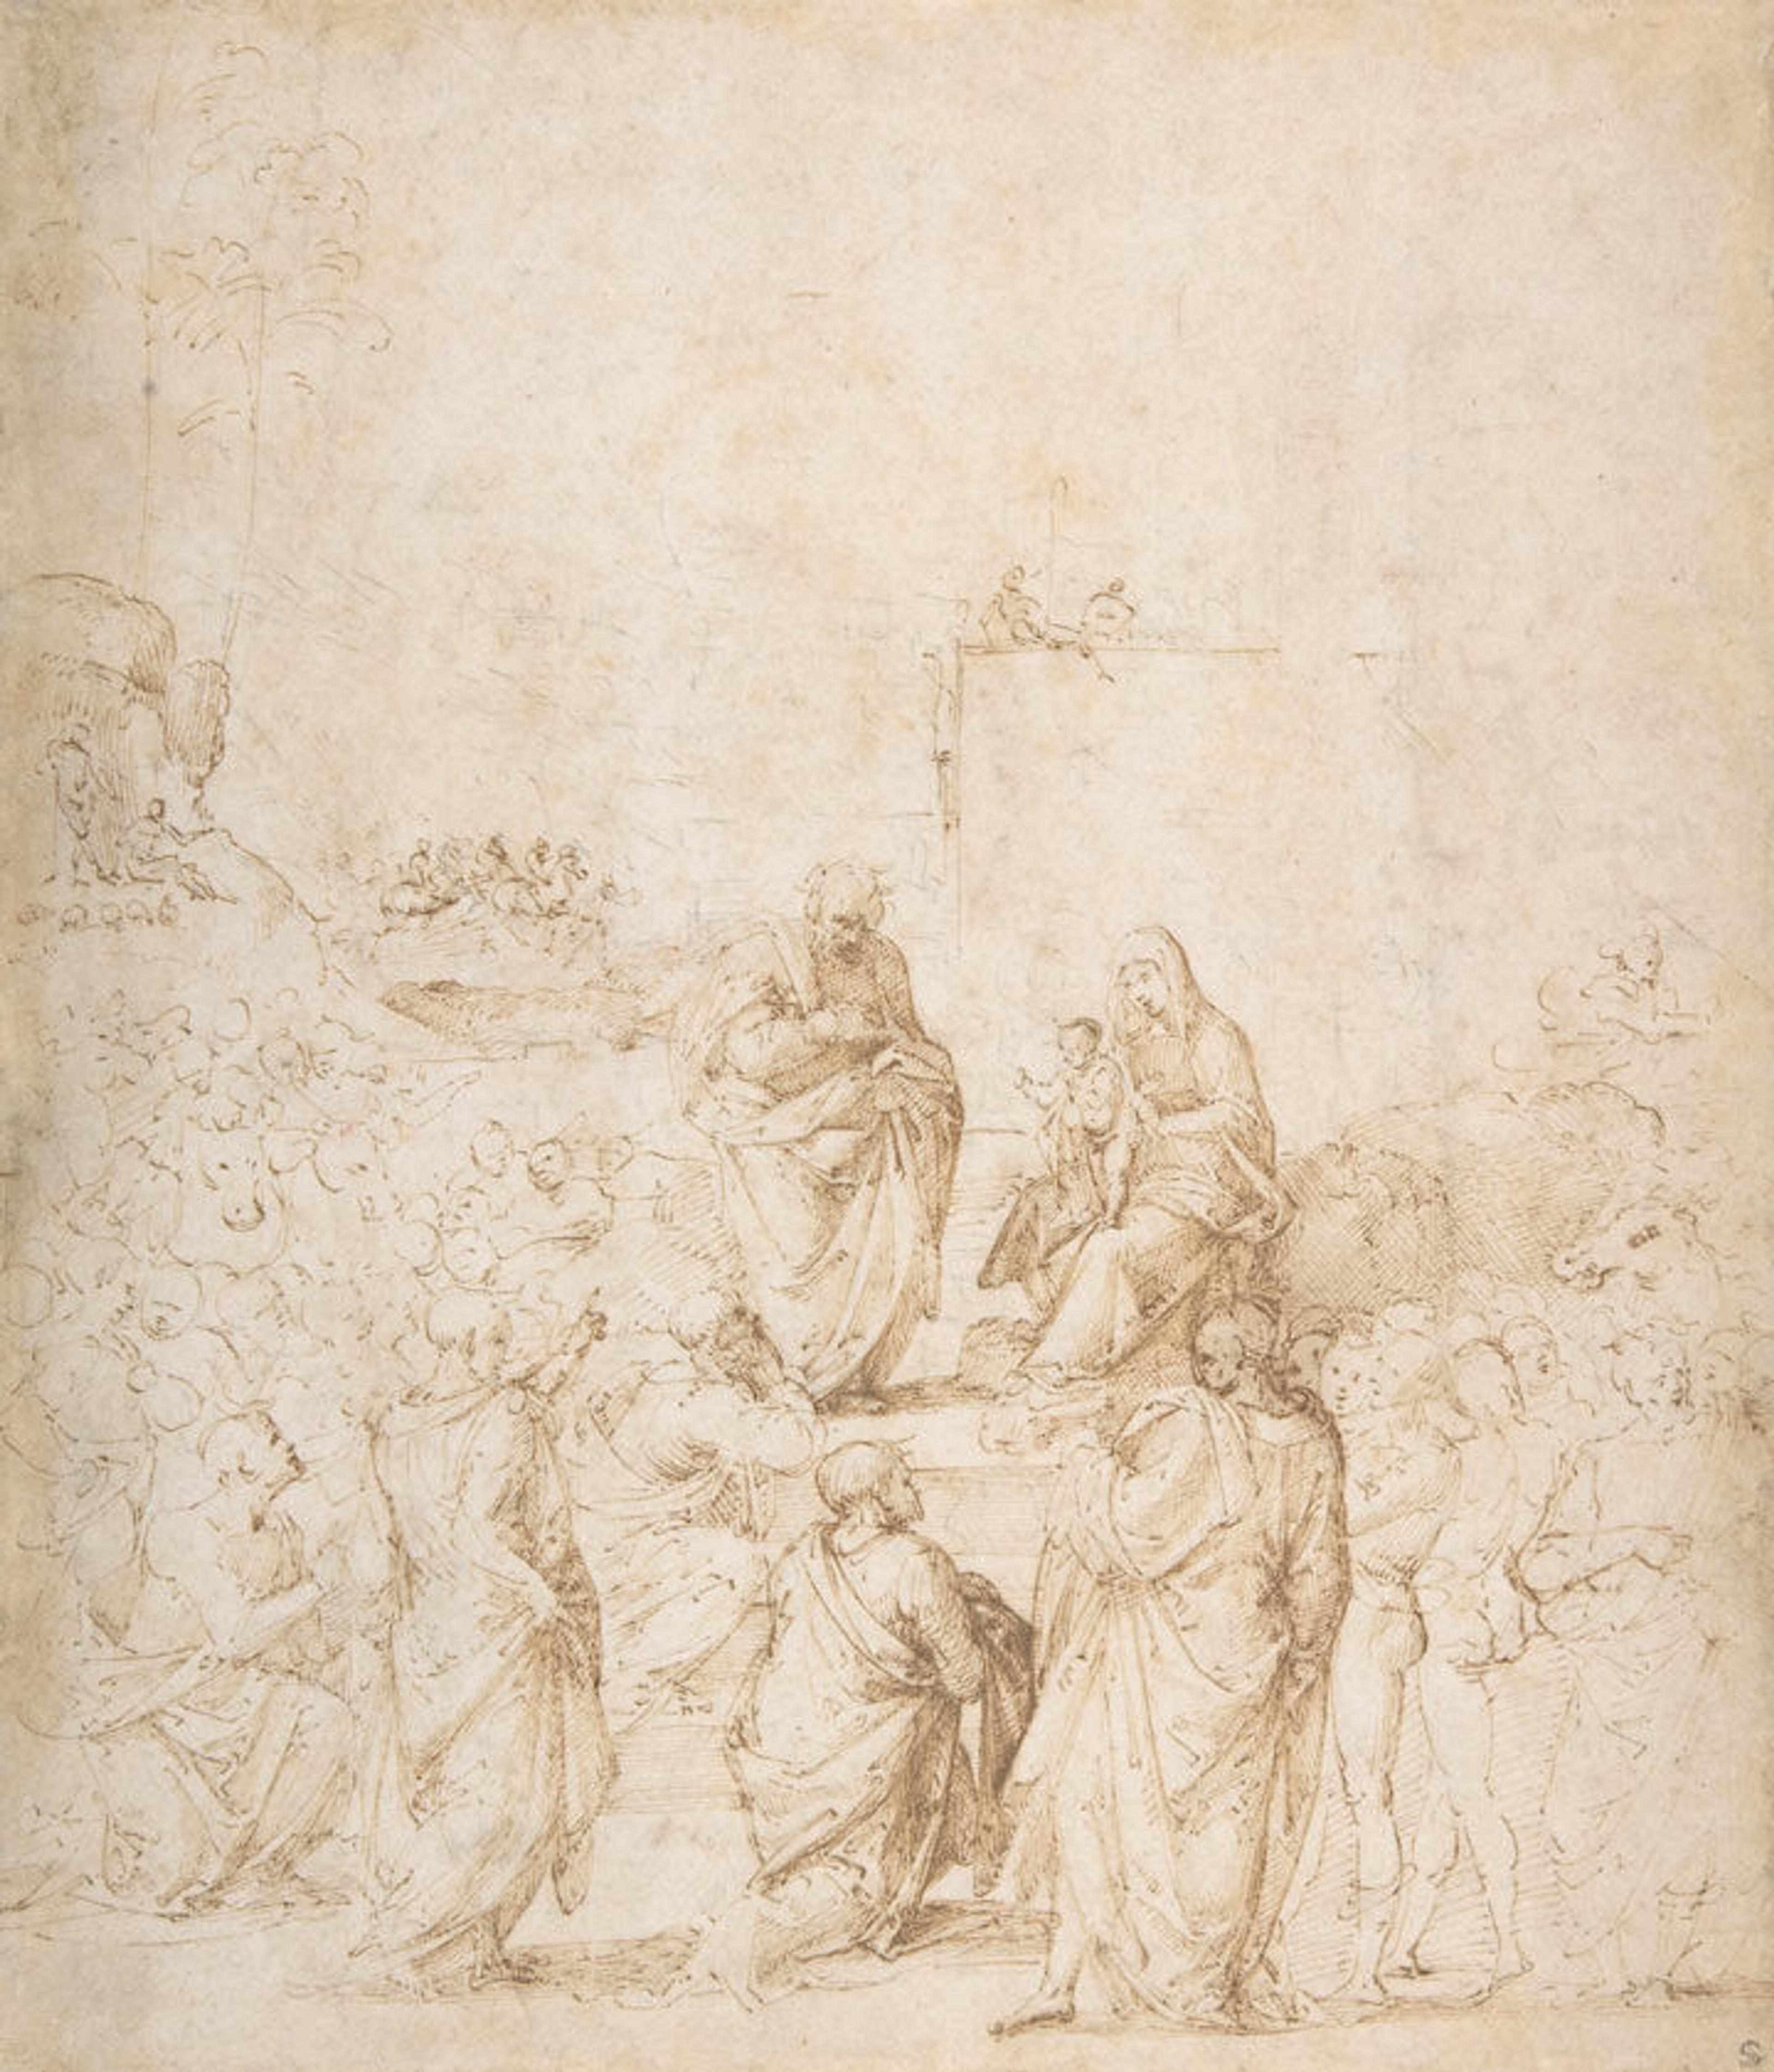 Pen and brown-ink drawing from the Italian Renaissance depicting the Adoration of the Magi